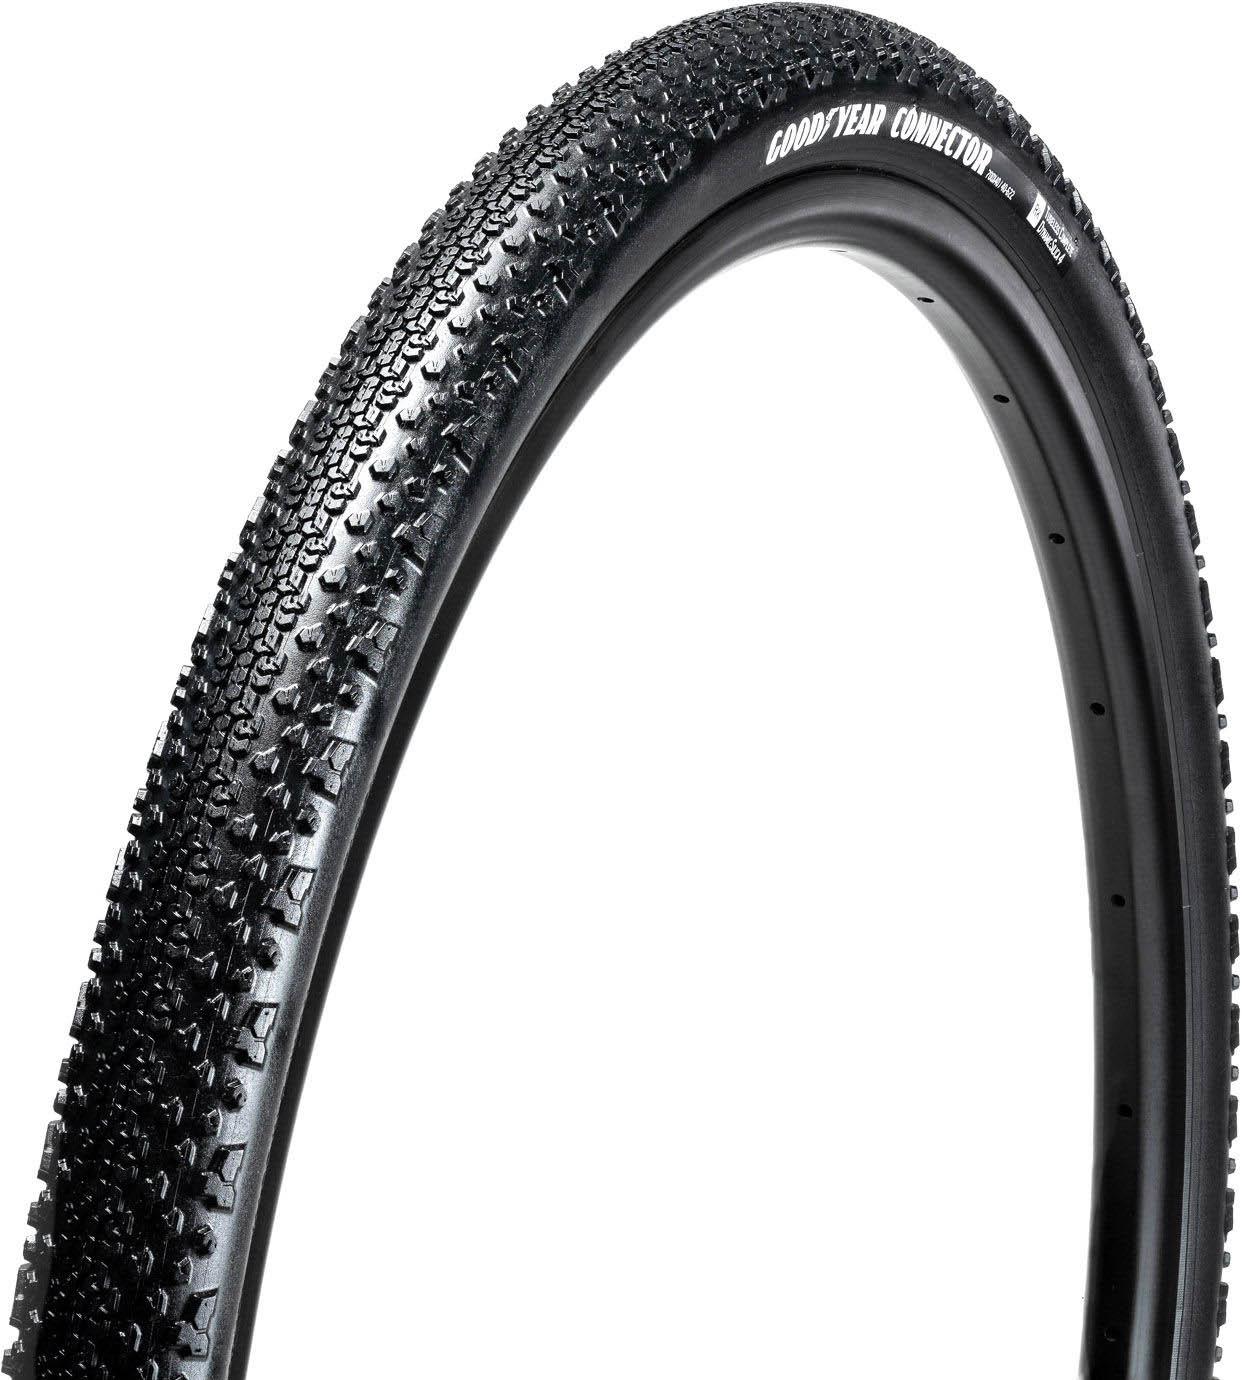 Goodyear Connector Tubeless Cyclocross Tyre  Black